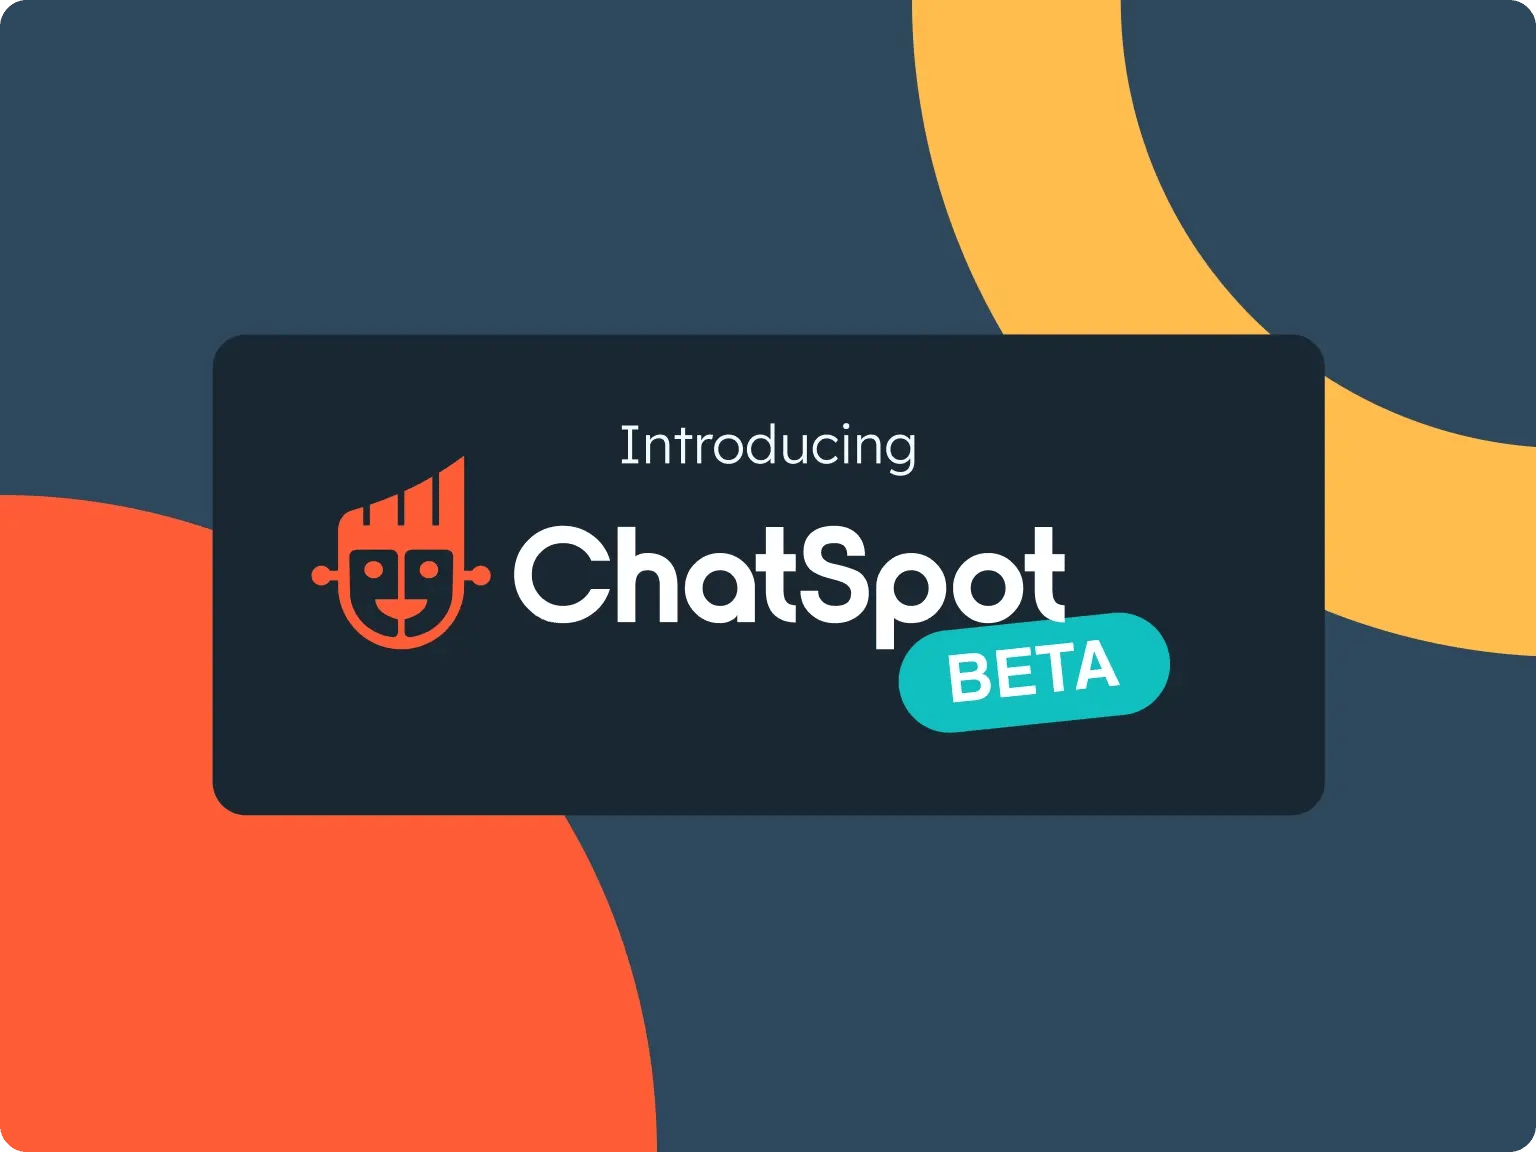 Video showing ChatSpot features